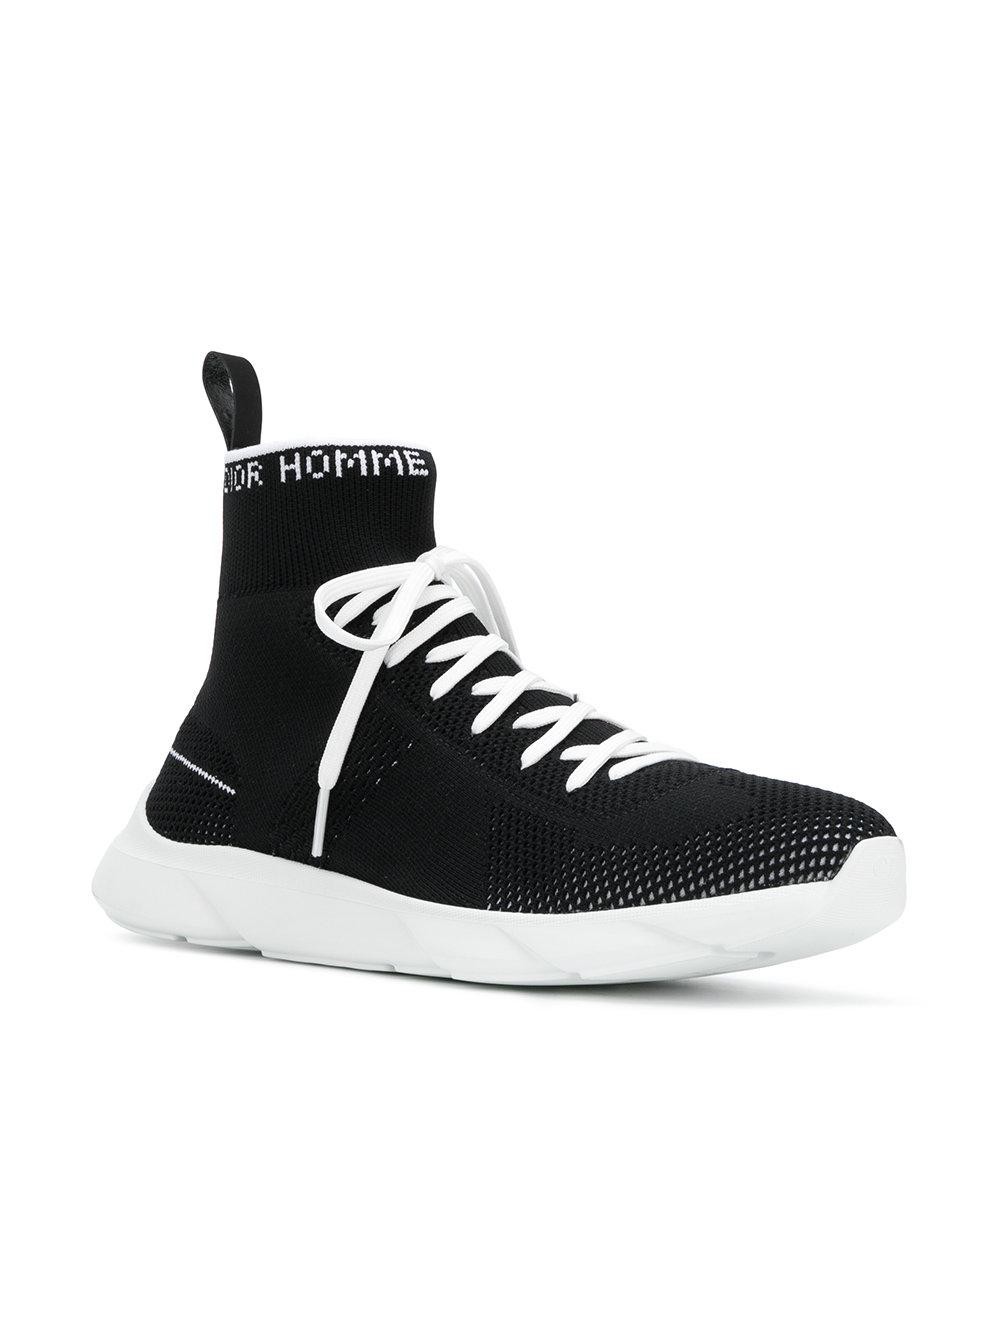 Dior Homme Leather High Top Sock Sneakers in Black for Men - Lyst